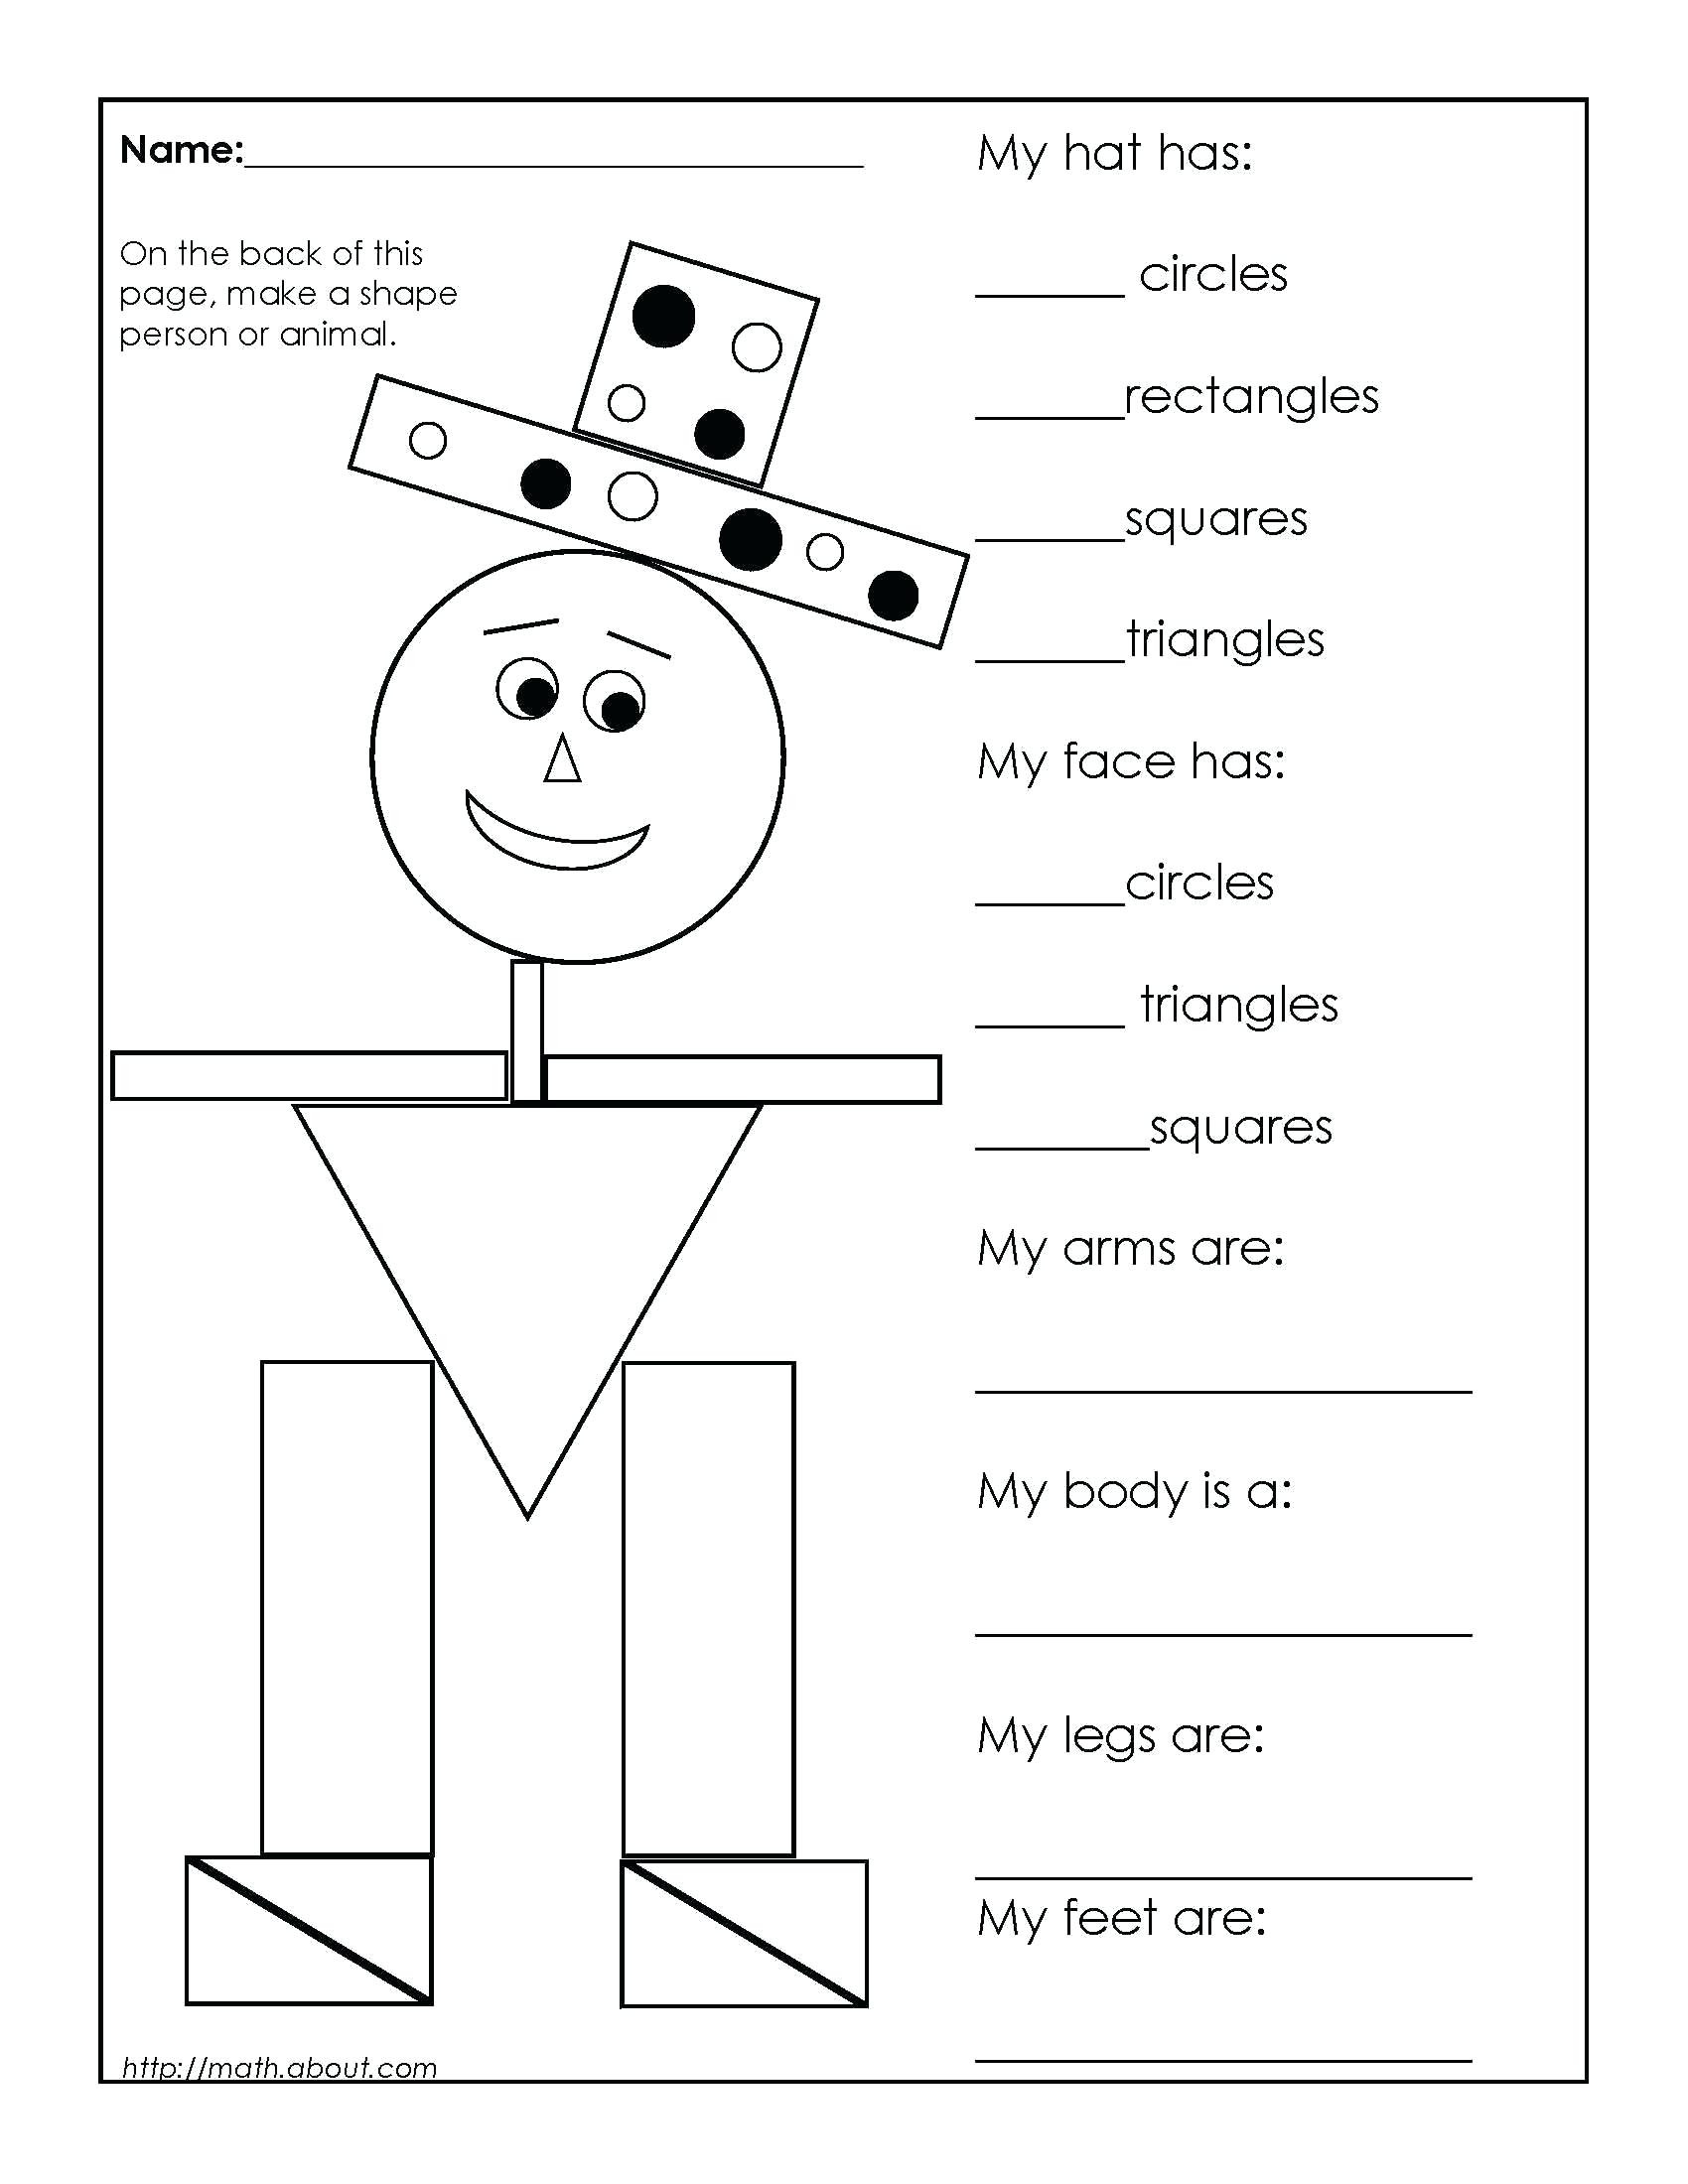 Free Math Worksheets Second Grade 2 Subtraction Subtract 3 Digit Numbers with Regrouping